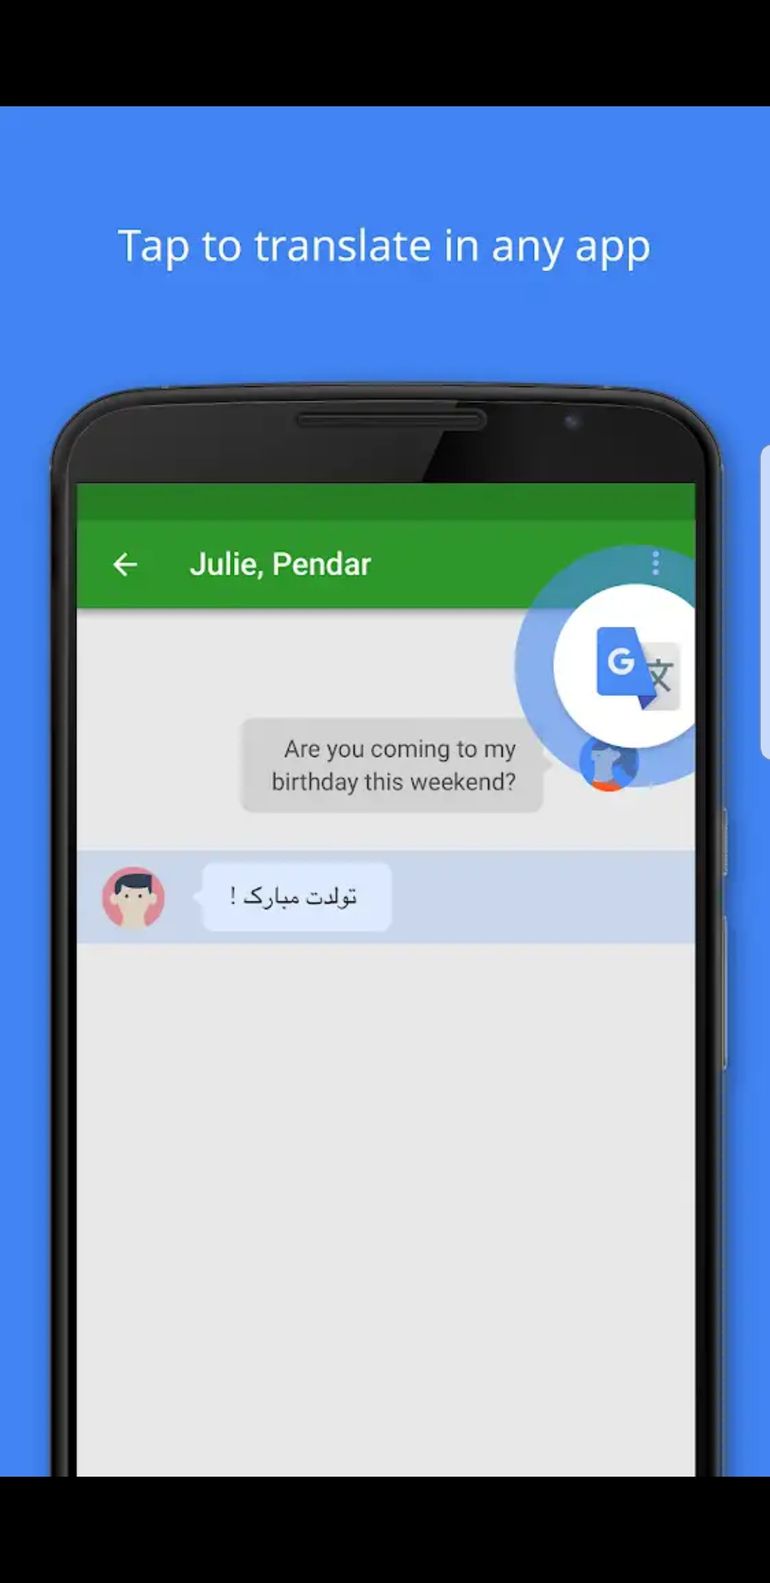 Tap to translate any other app with our handy google translate recommendation